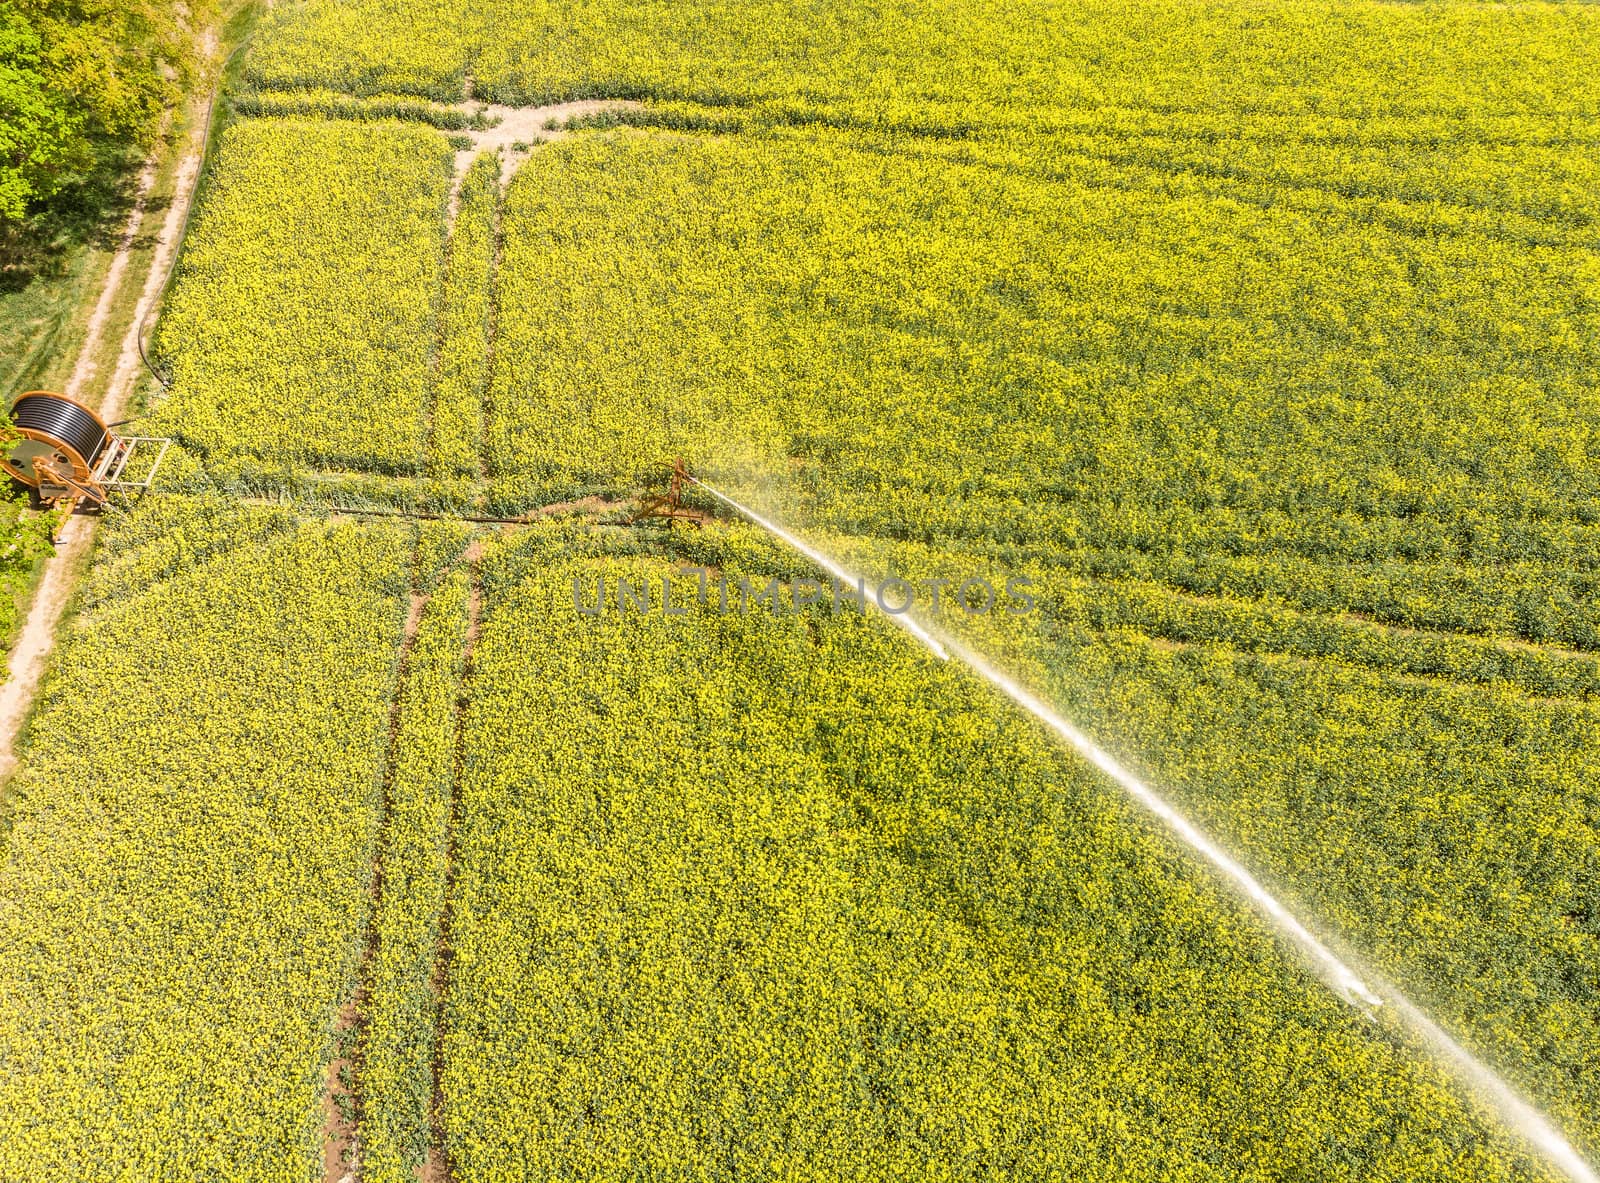 Aerial view from the sprinkler system to supply the plants with water from a blooming field with oilseed rape (Brassica napus) by geogif